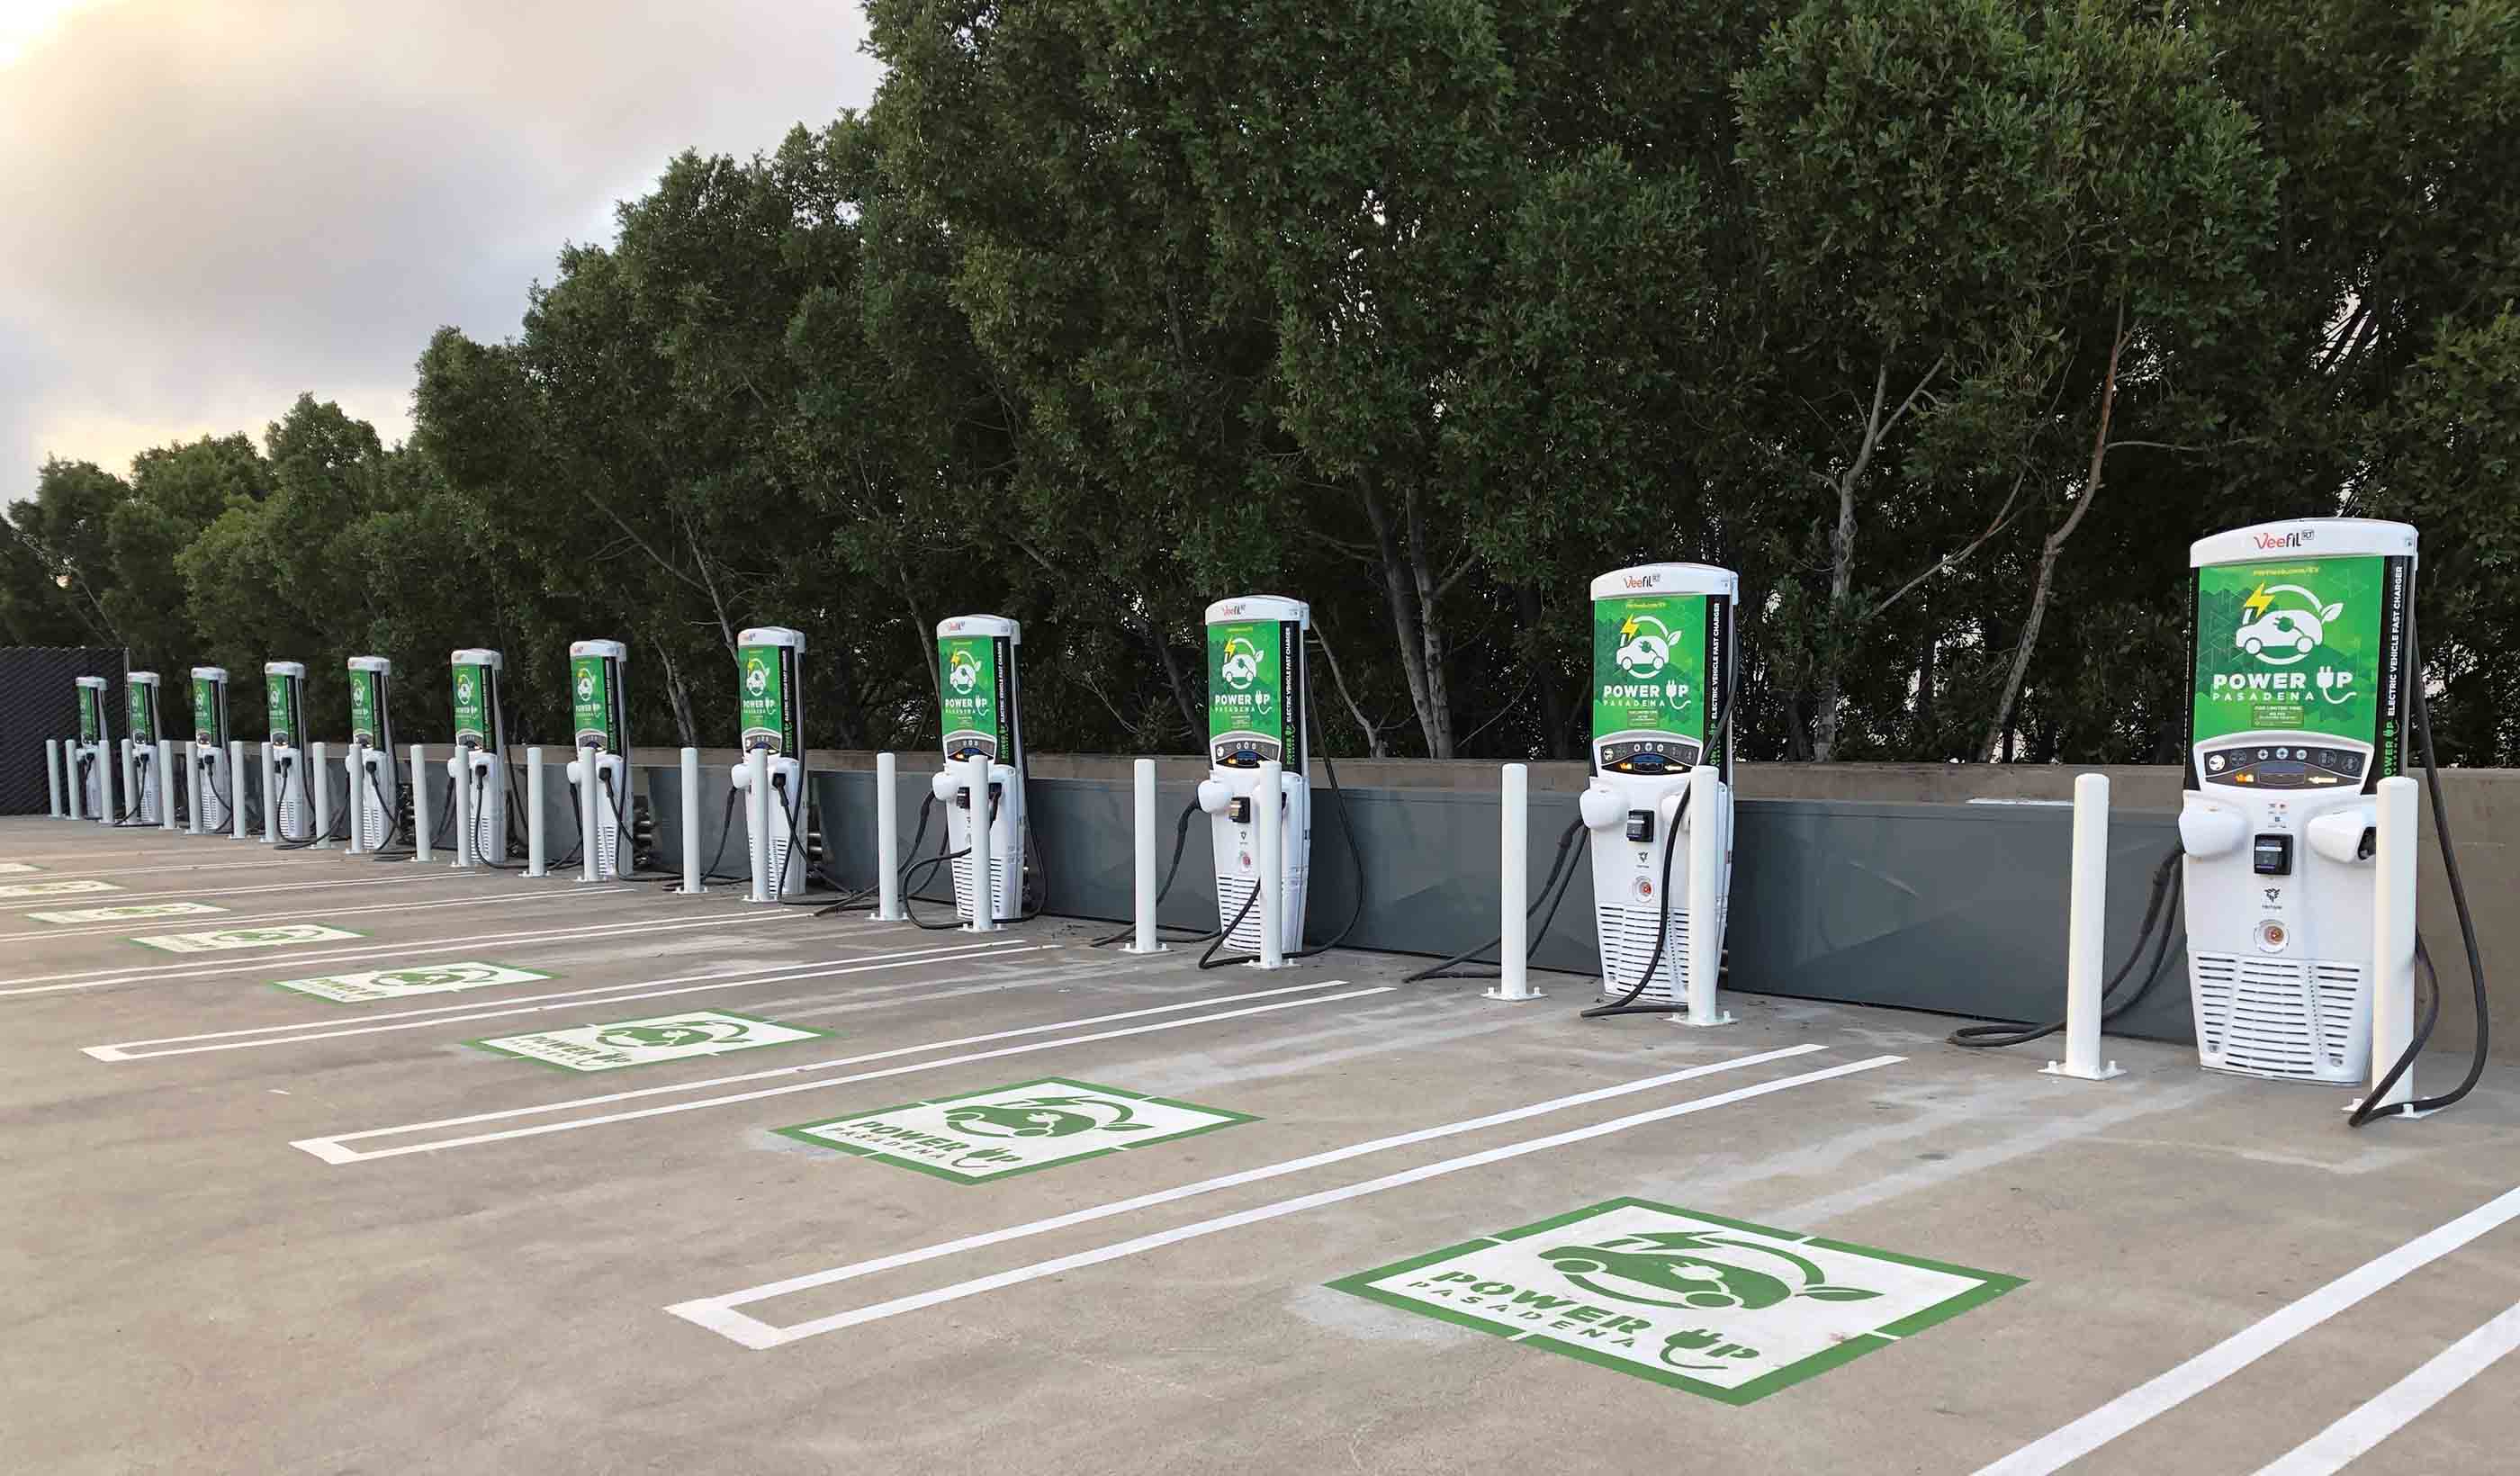 The largest public charging station in the US showcases the challenges facing developers